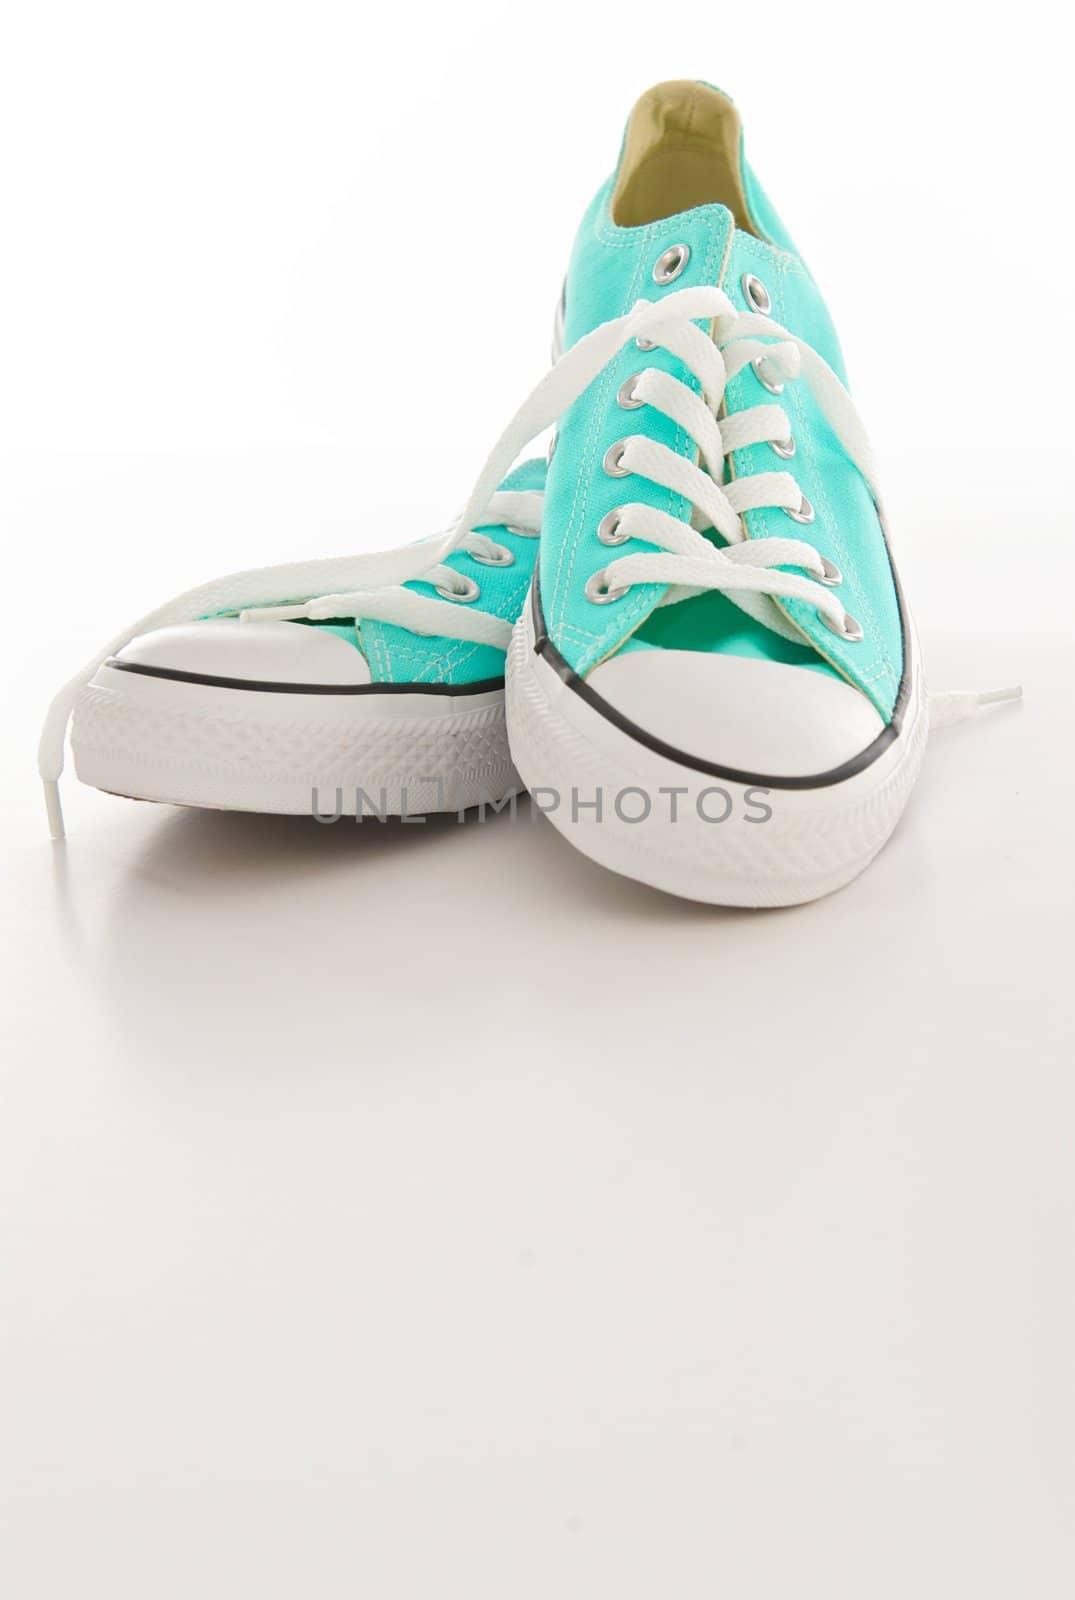 Turquoise and White Canvas Sneakers on a Blank Background by pixelsnap